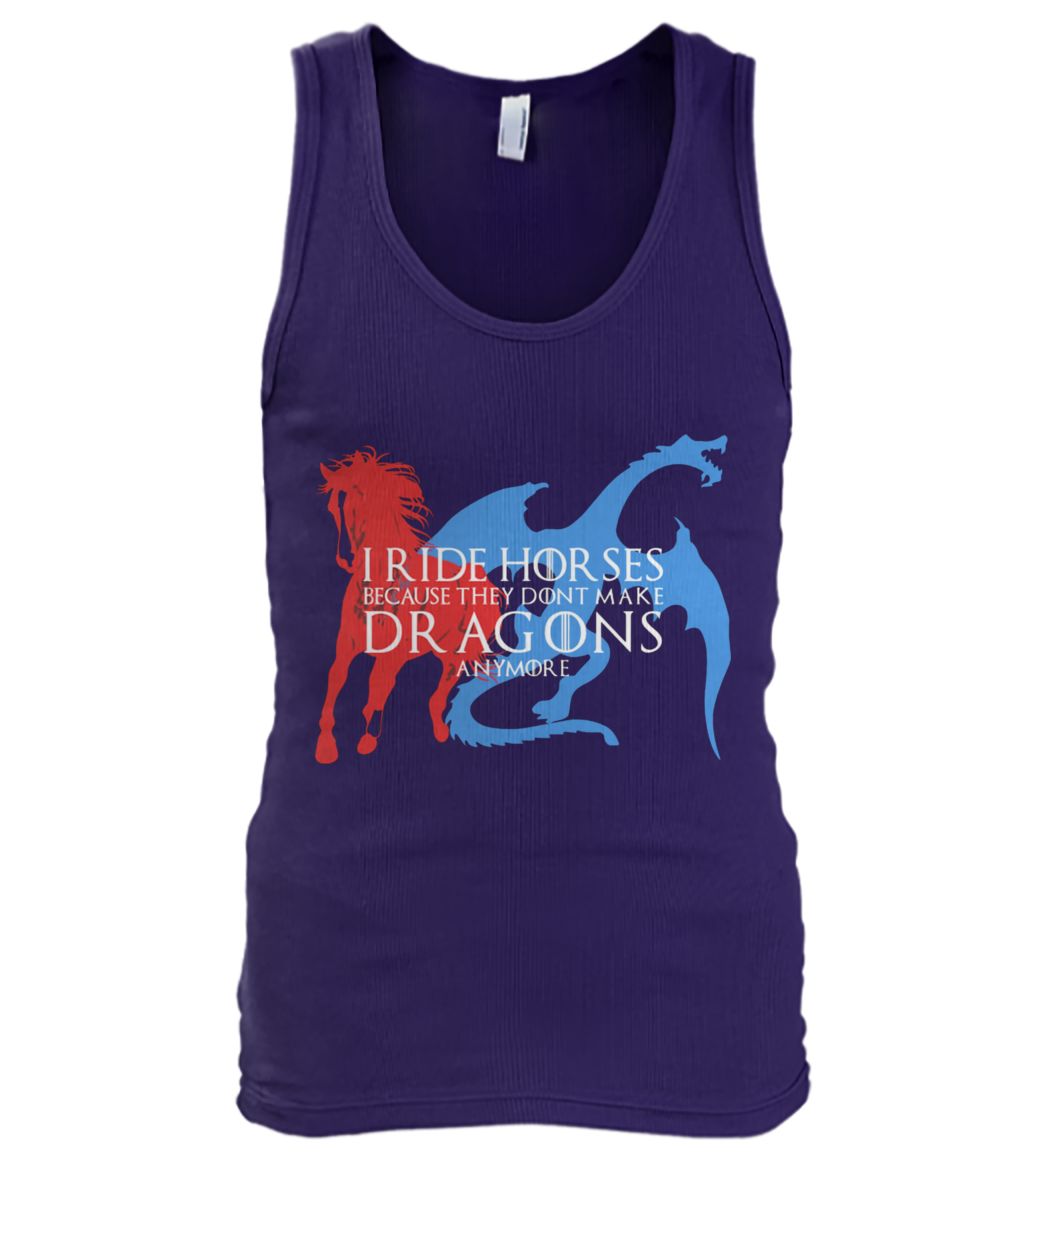 I ride hor ses because they dont make dragons anymore game of thrones men's tank top